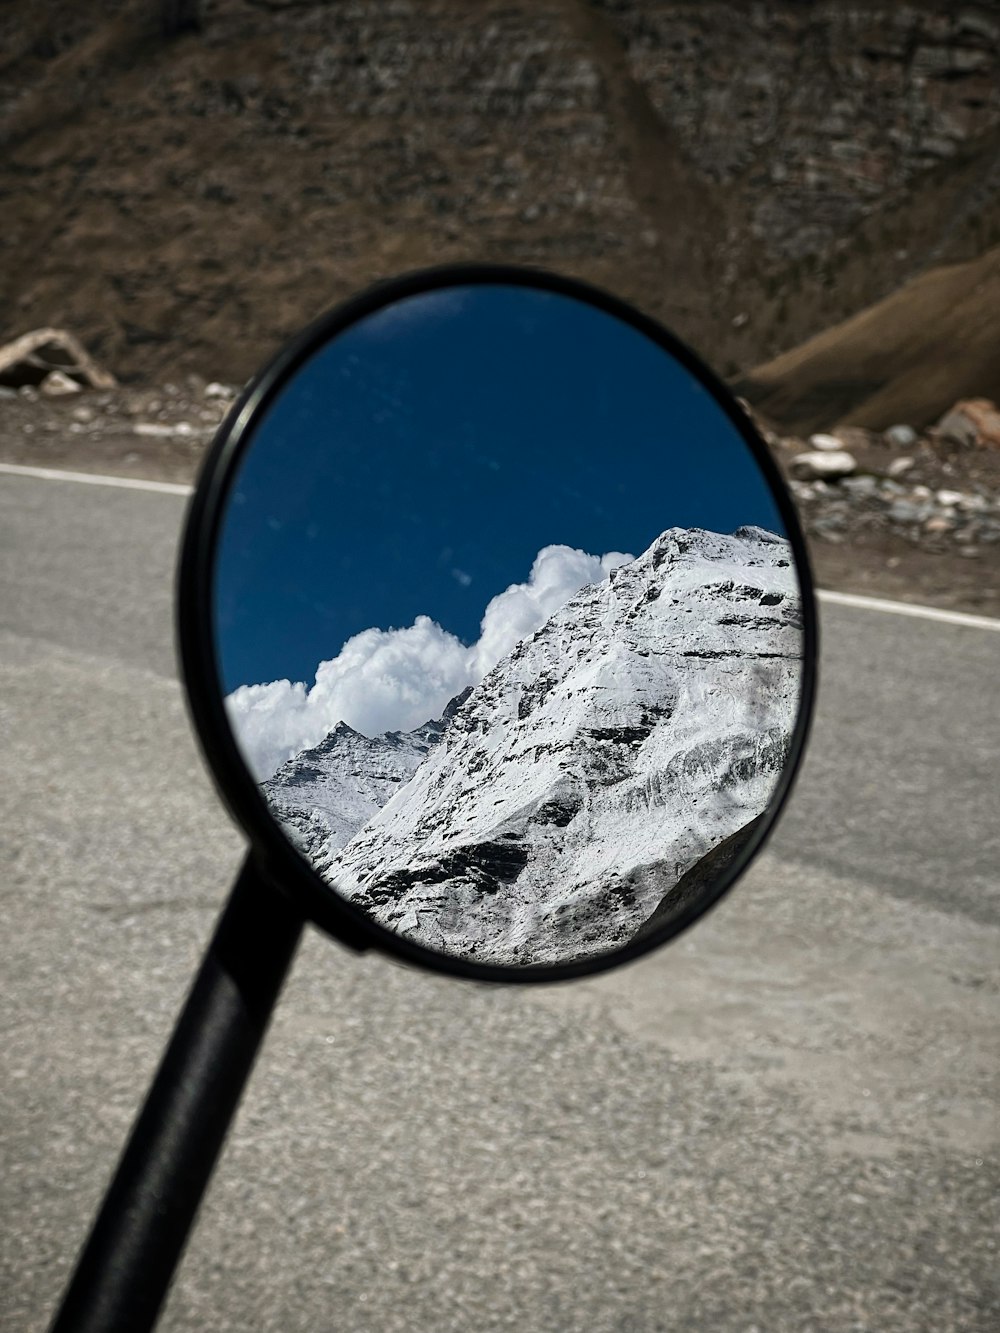 a rear view mirror on the side of a road